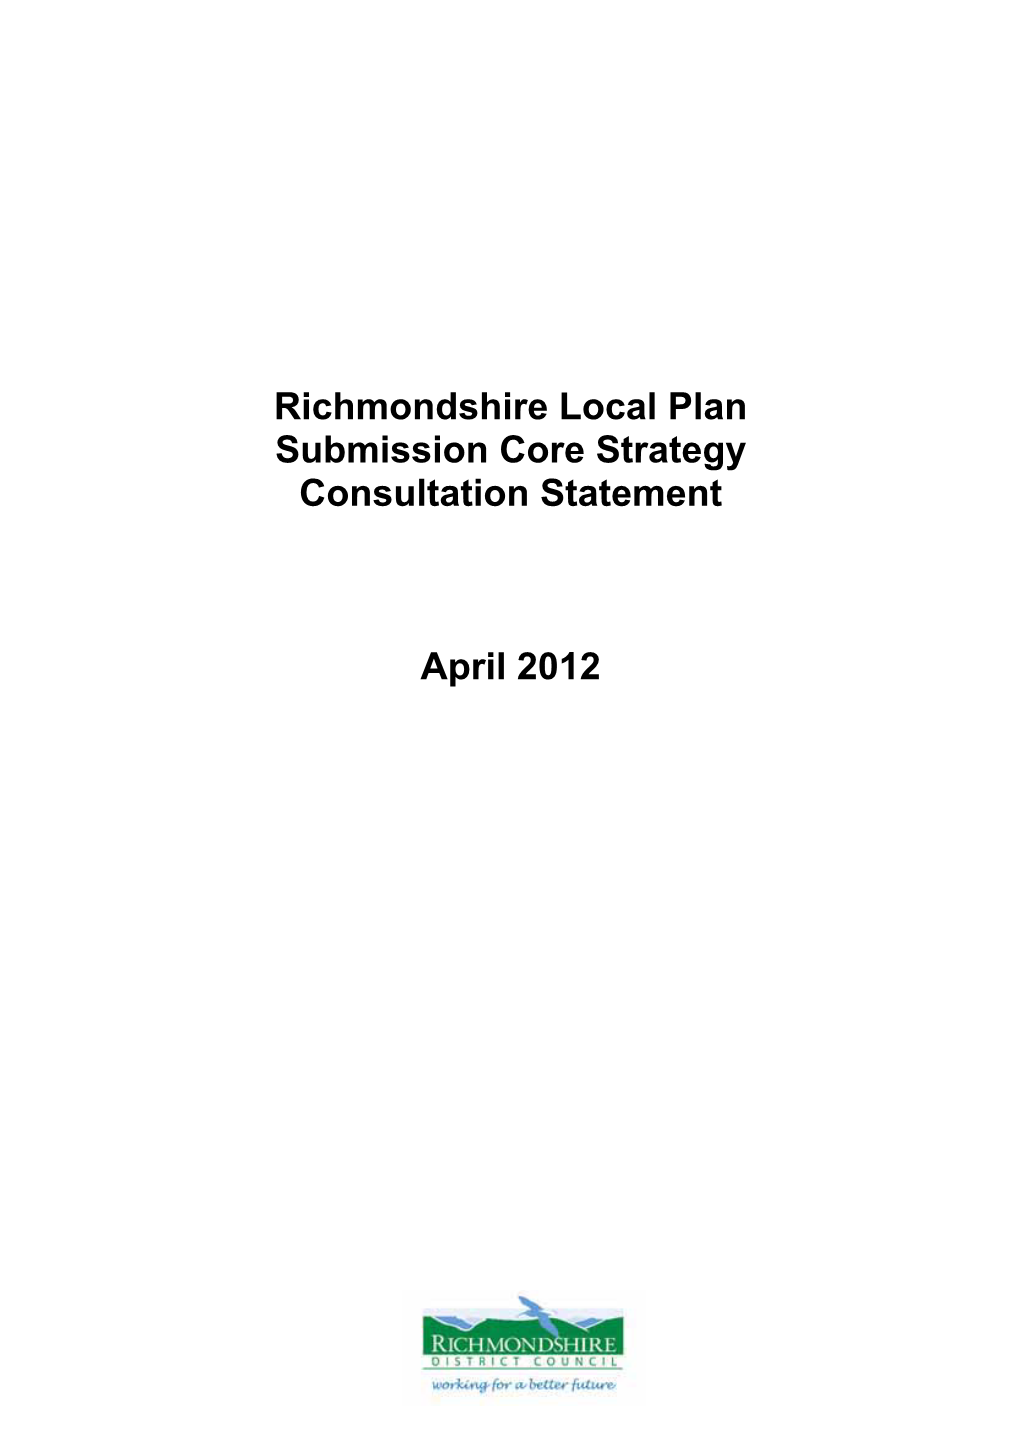 SD005 Richmondshire Local Plan Submission Core Strategy